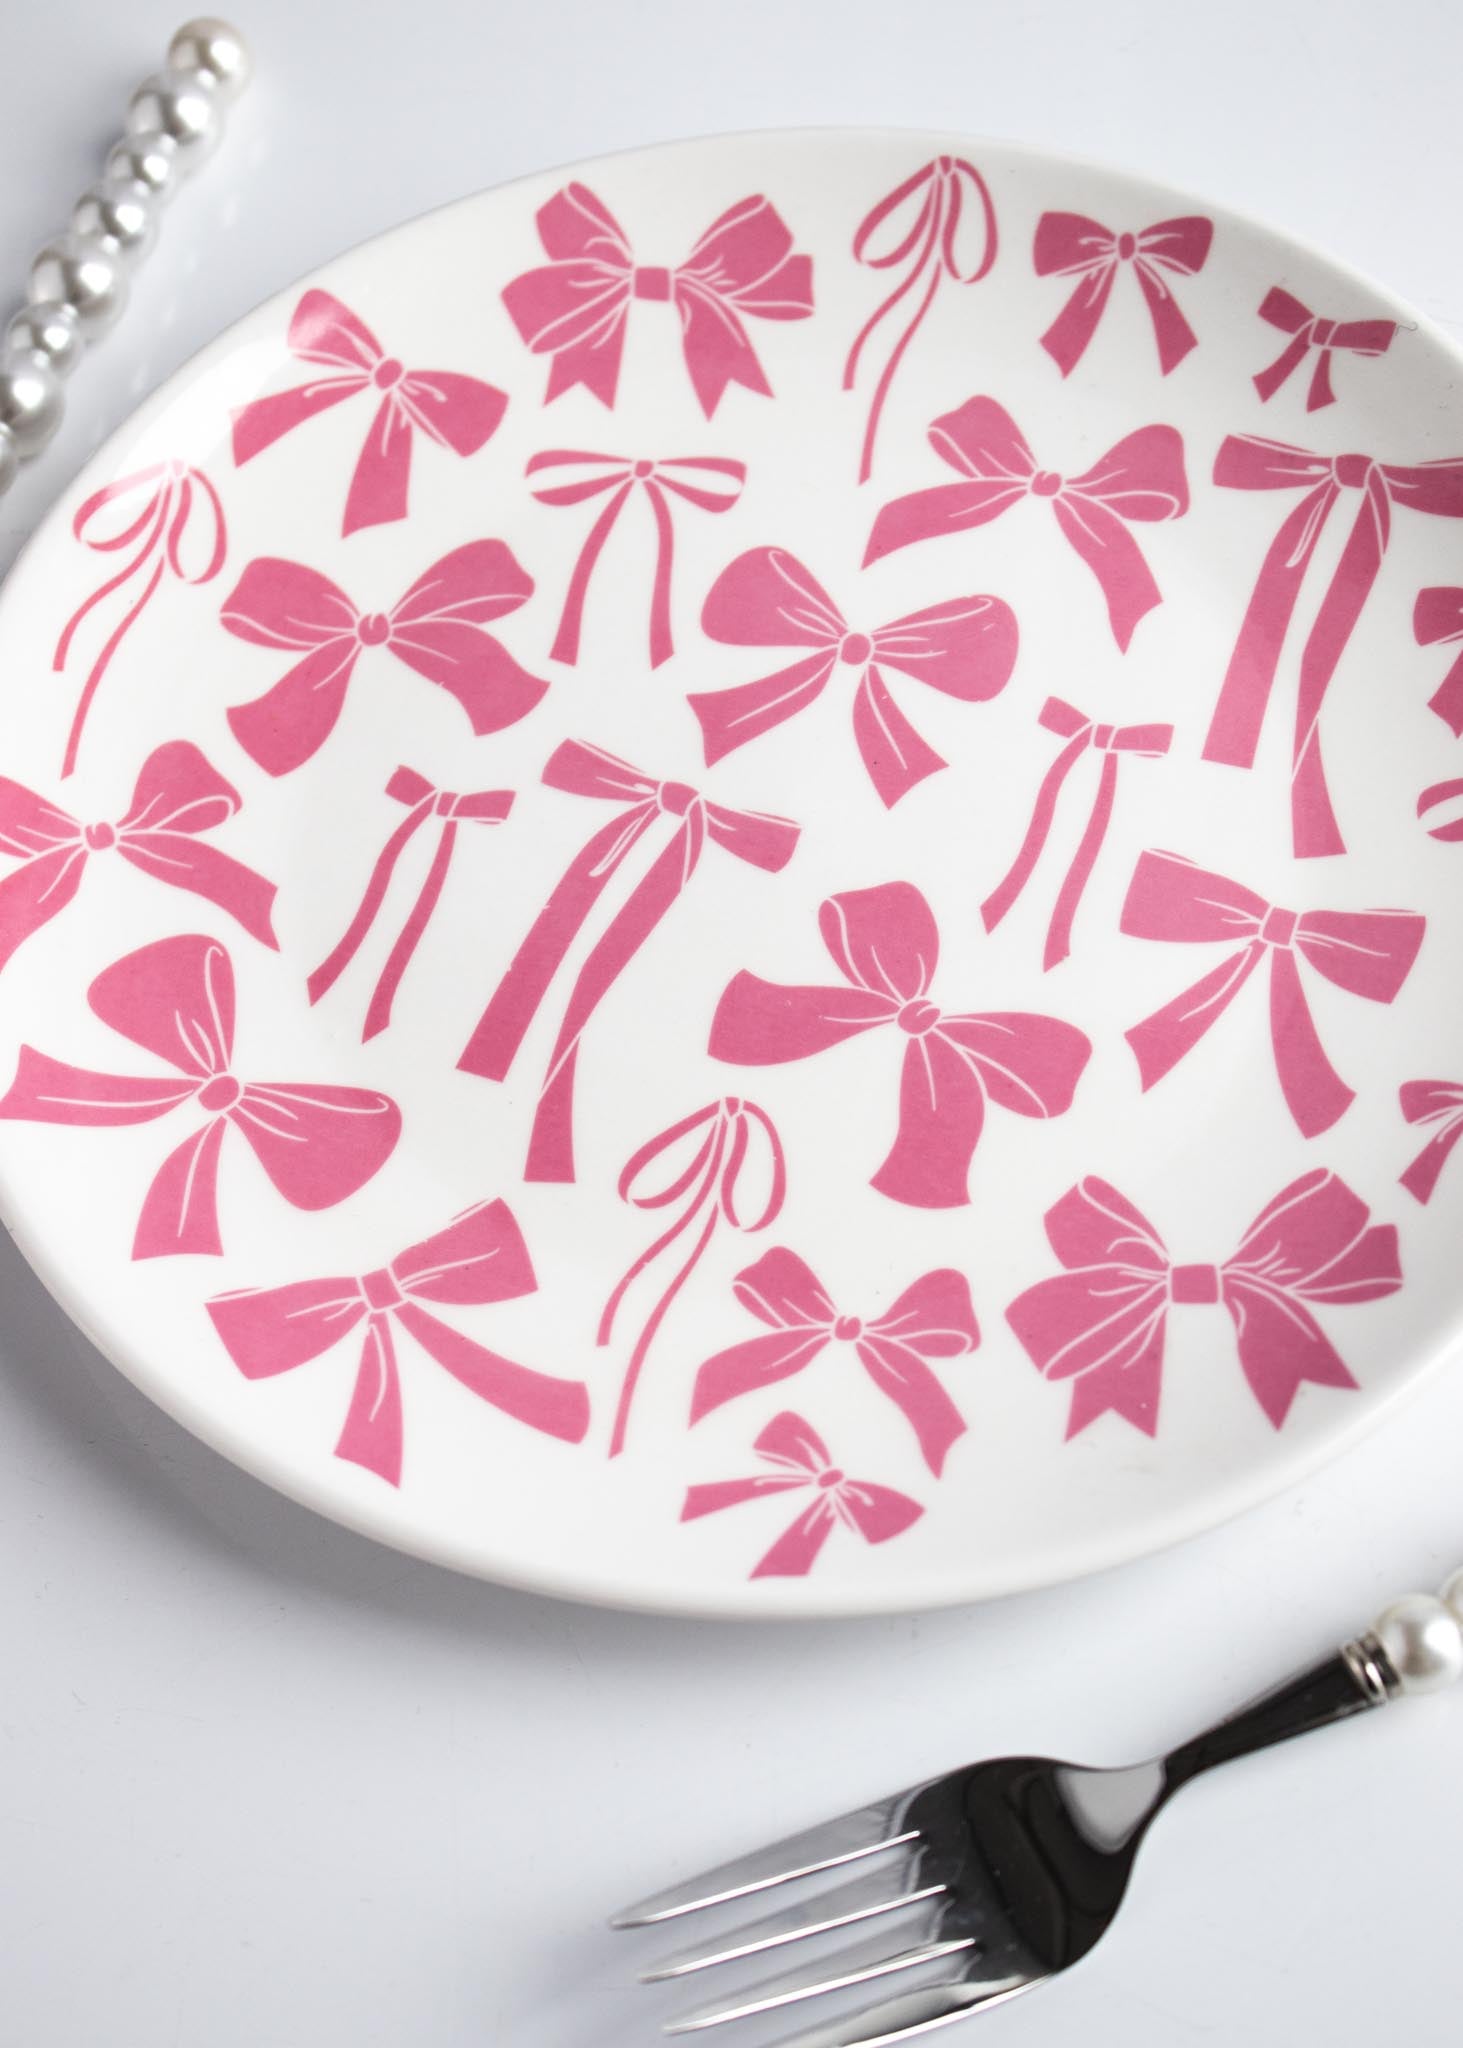 DINNER PLATE - PINK BOWS